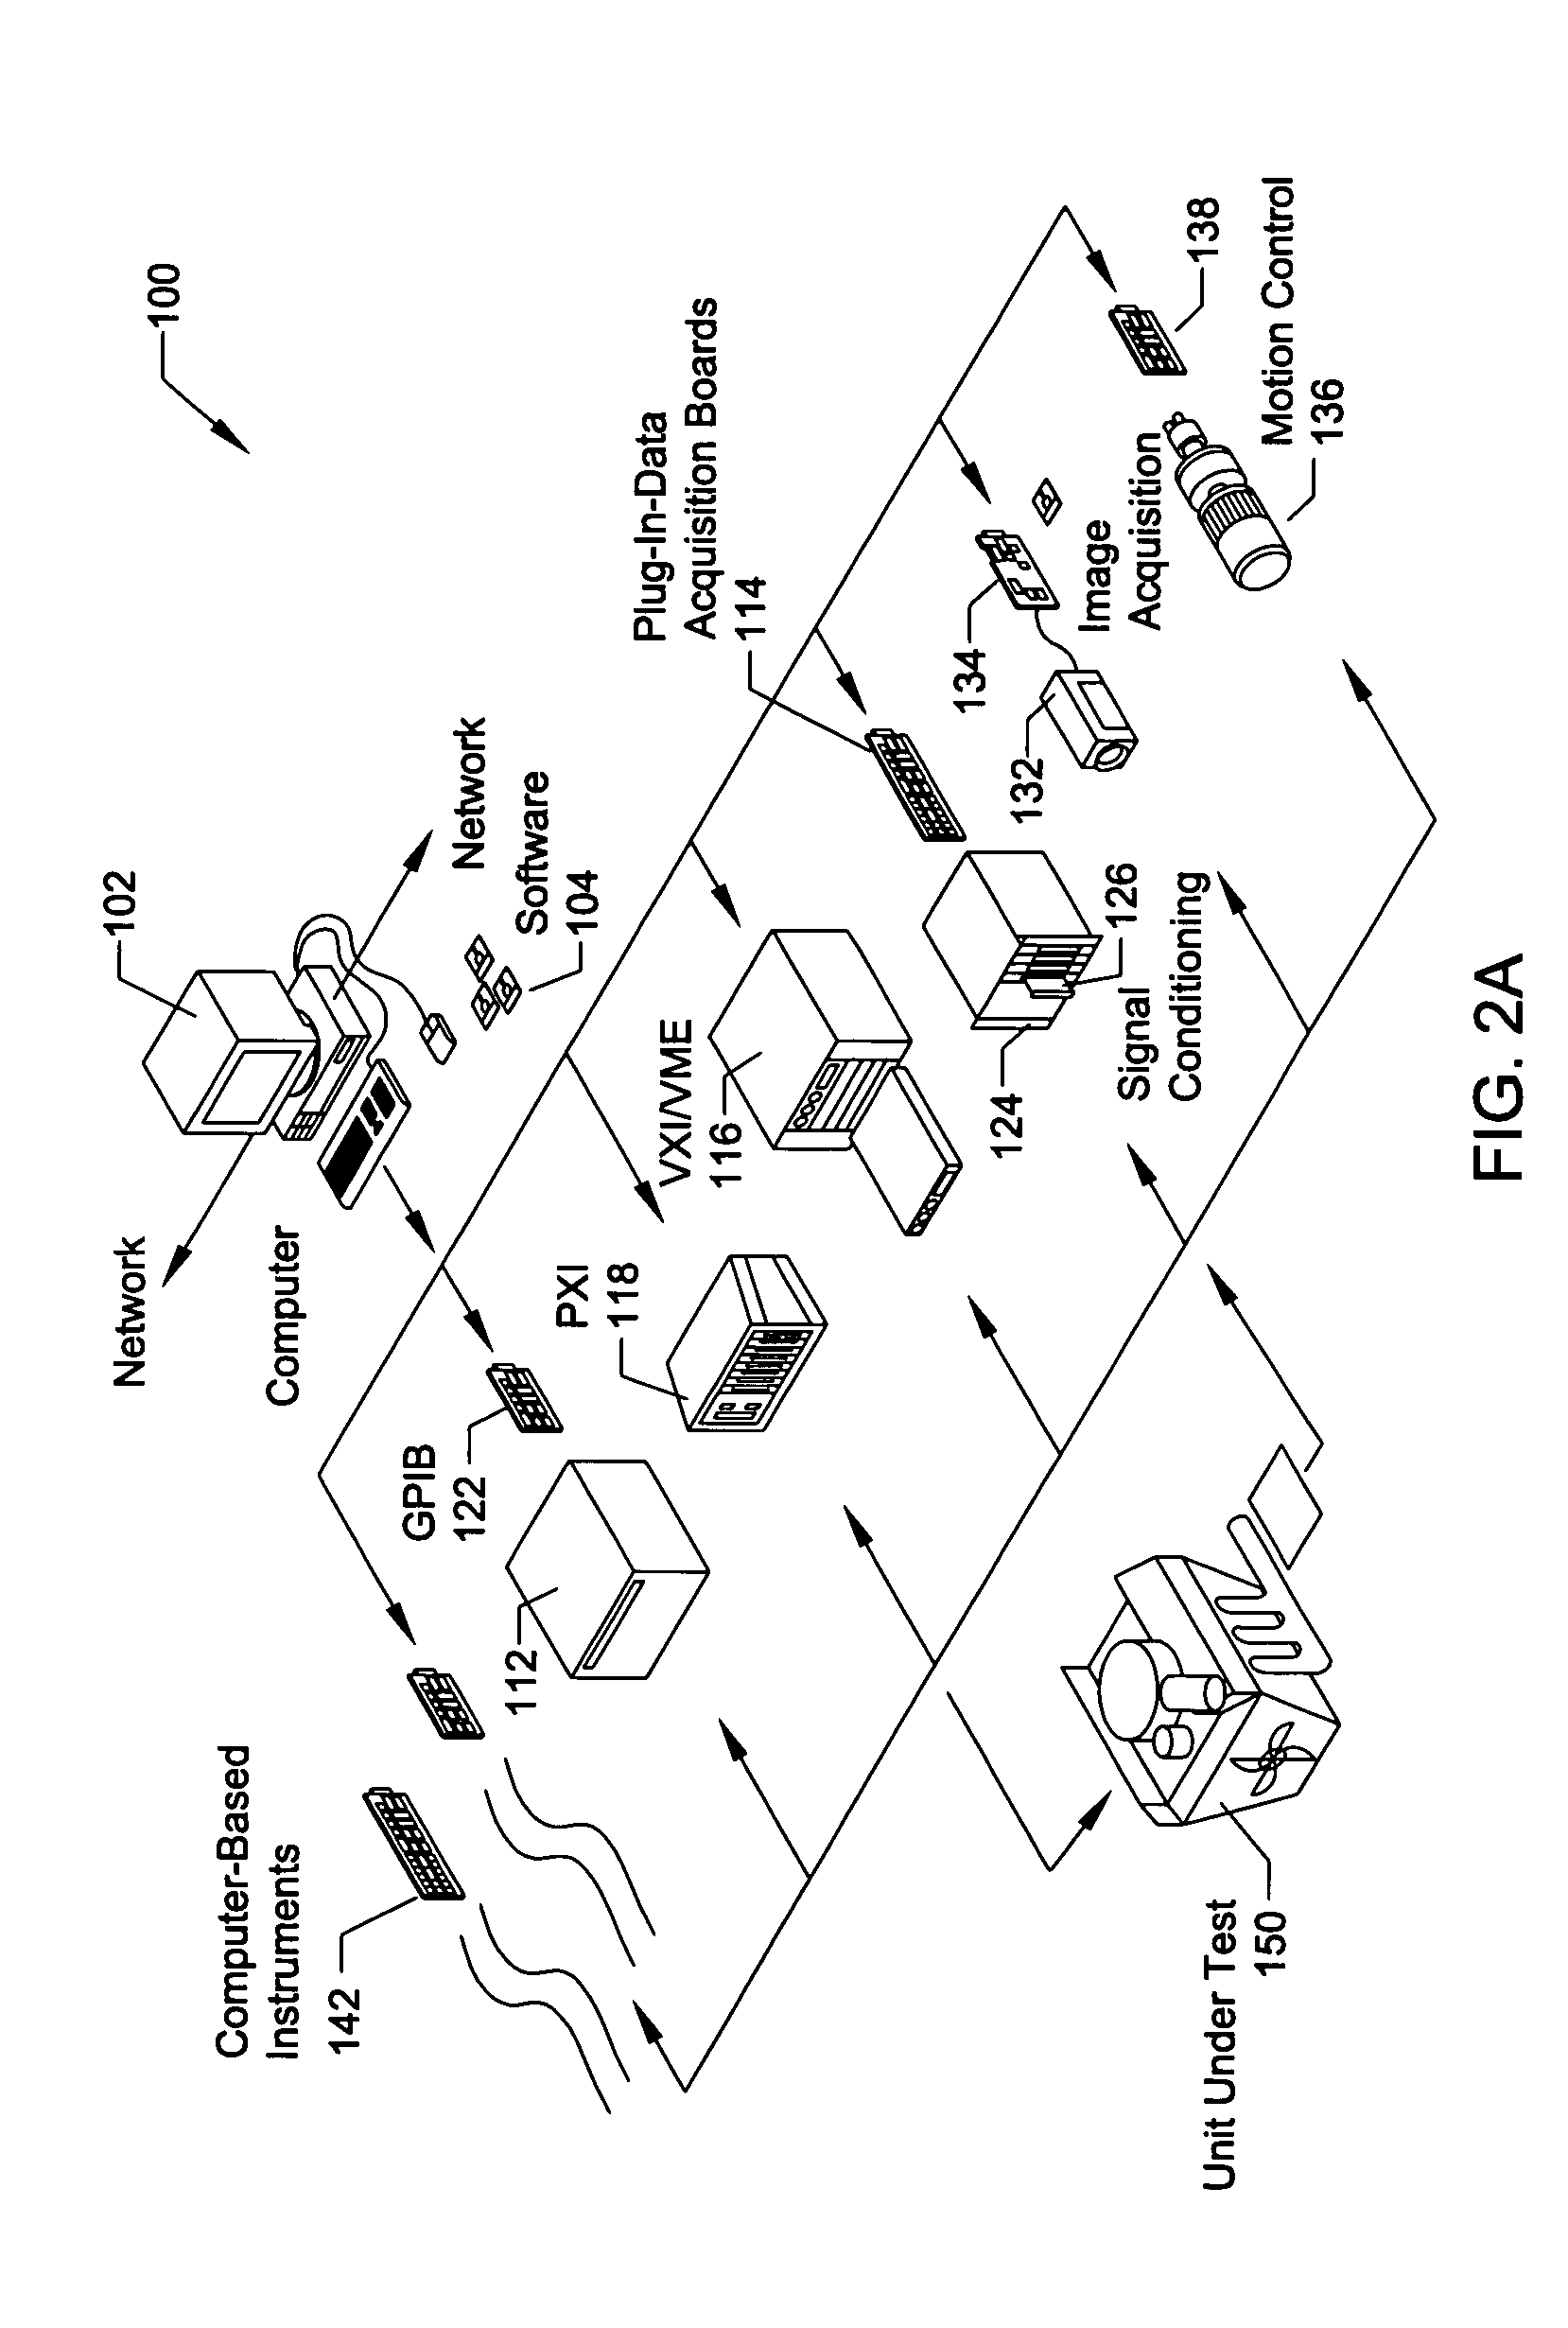 System and method for automatically creating a prototype to perform a process